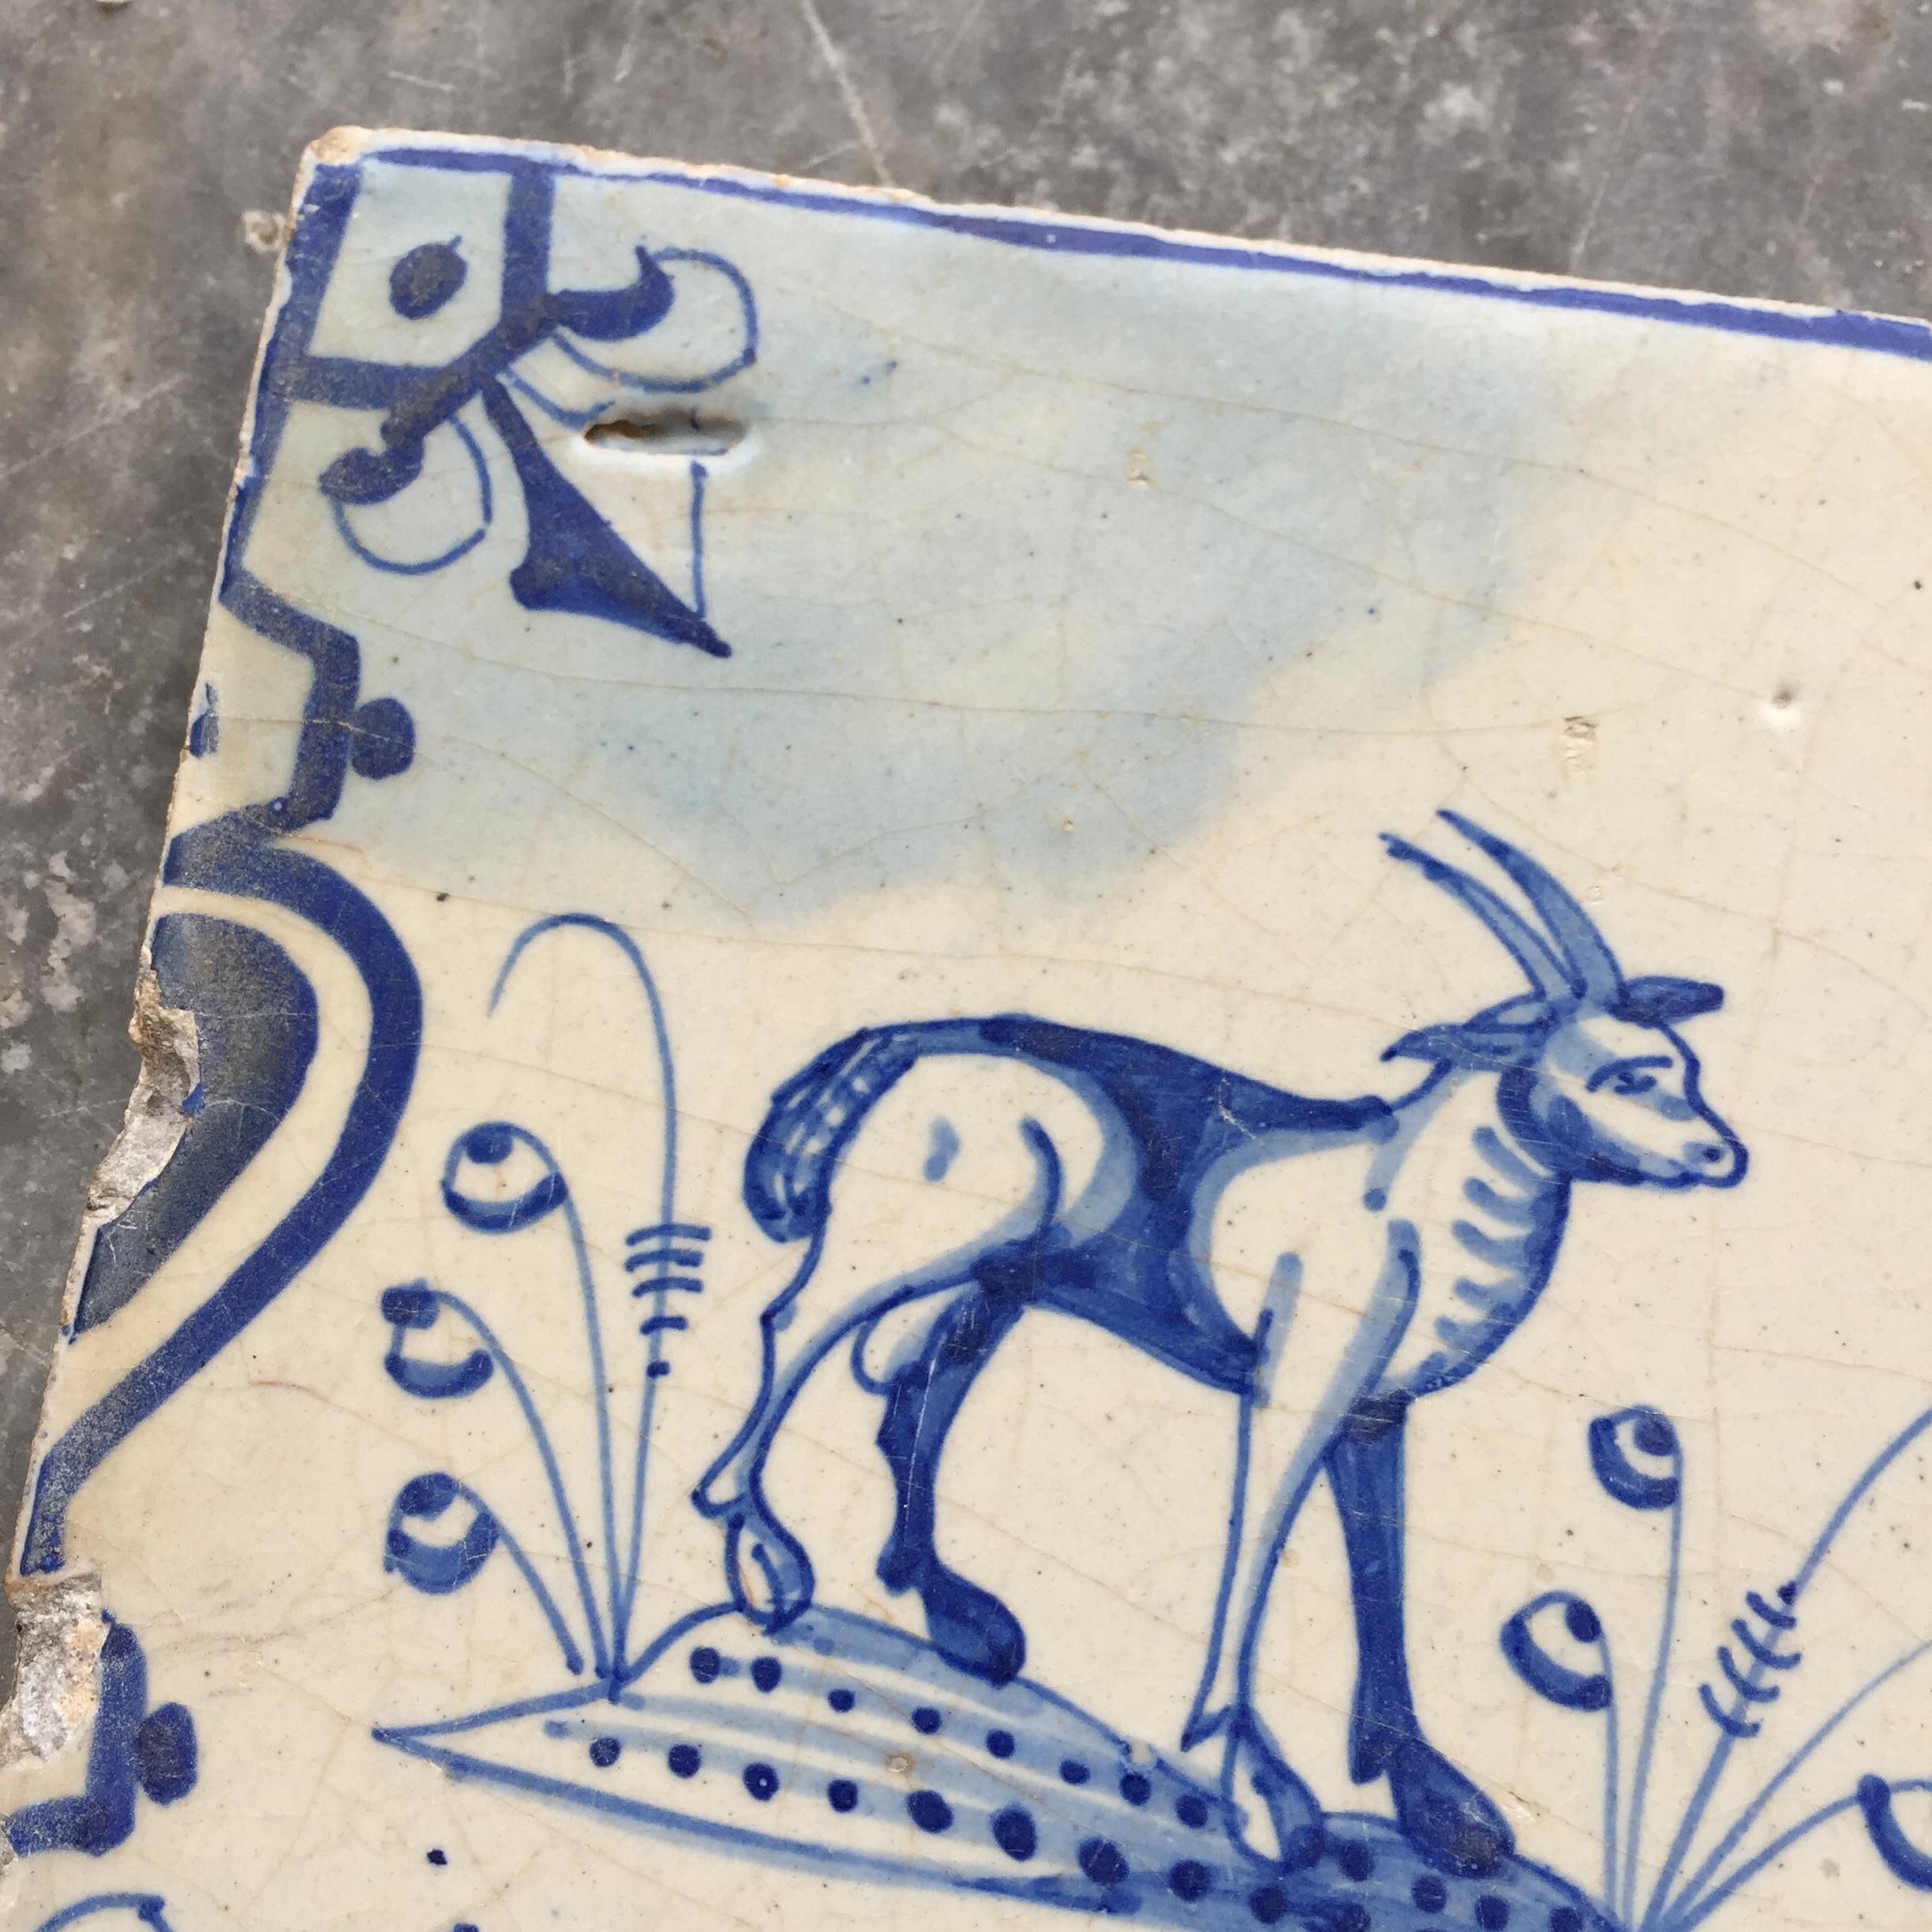 Baroque 17th Century Dutch Delft Tile with decoration of a Goat For Sale